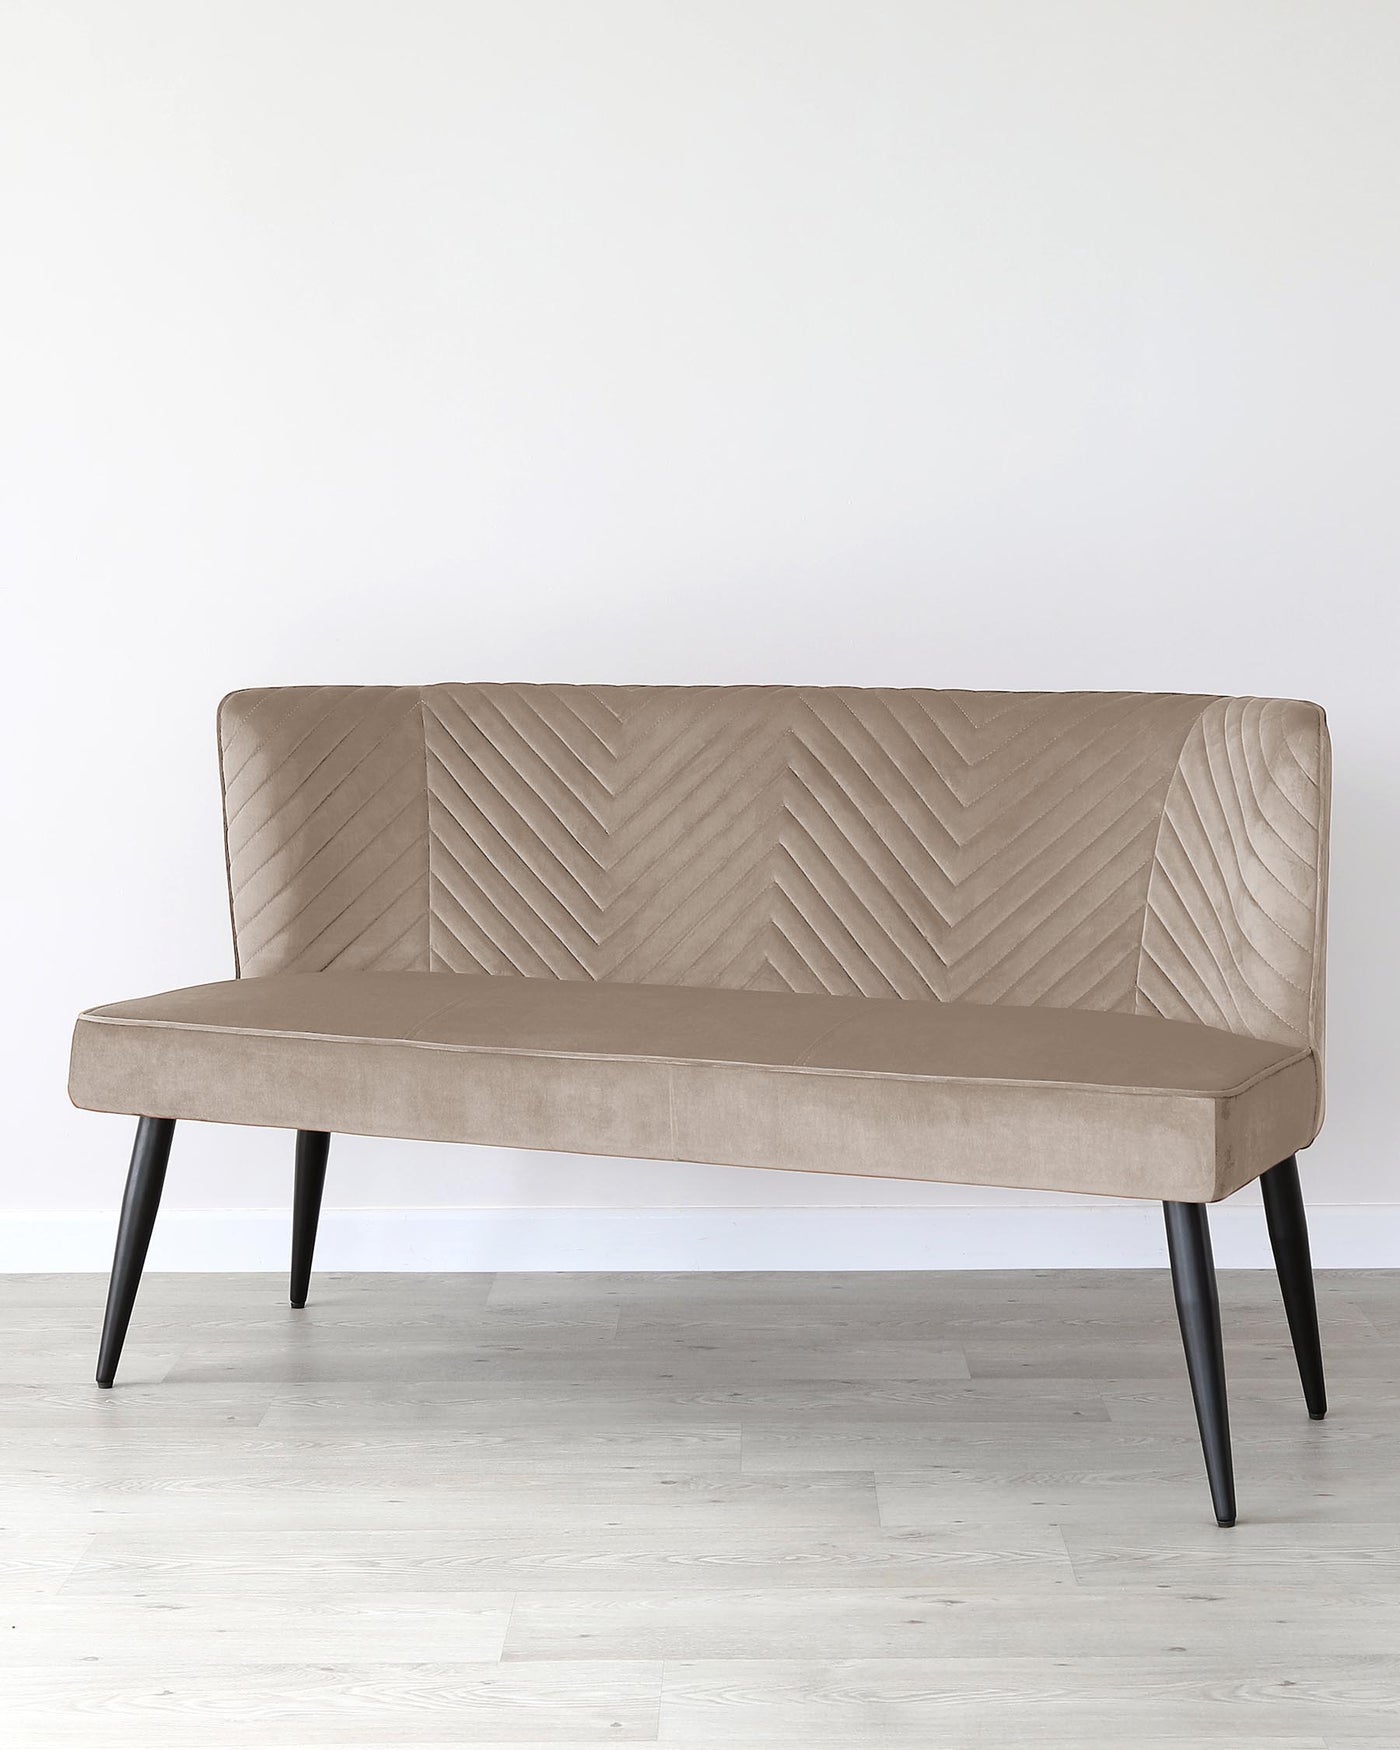 Modern upholstered bench with chevron-patterned backrest and seat in a light taupe fabric, complemented by four slanted black wooden legs. The bench is positioned against a plain white wall on a light wooden floor.